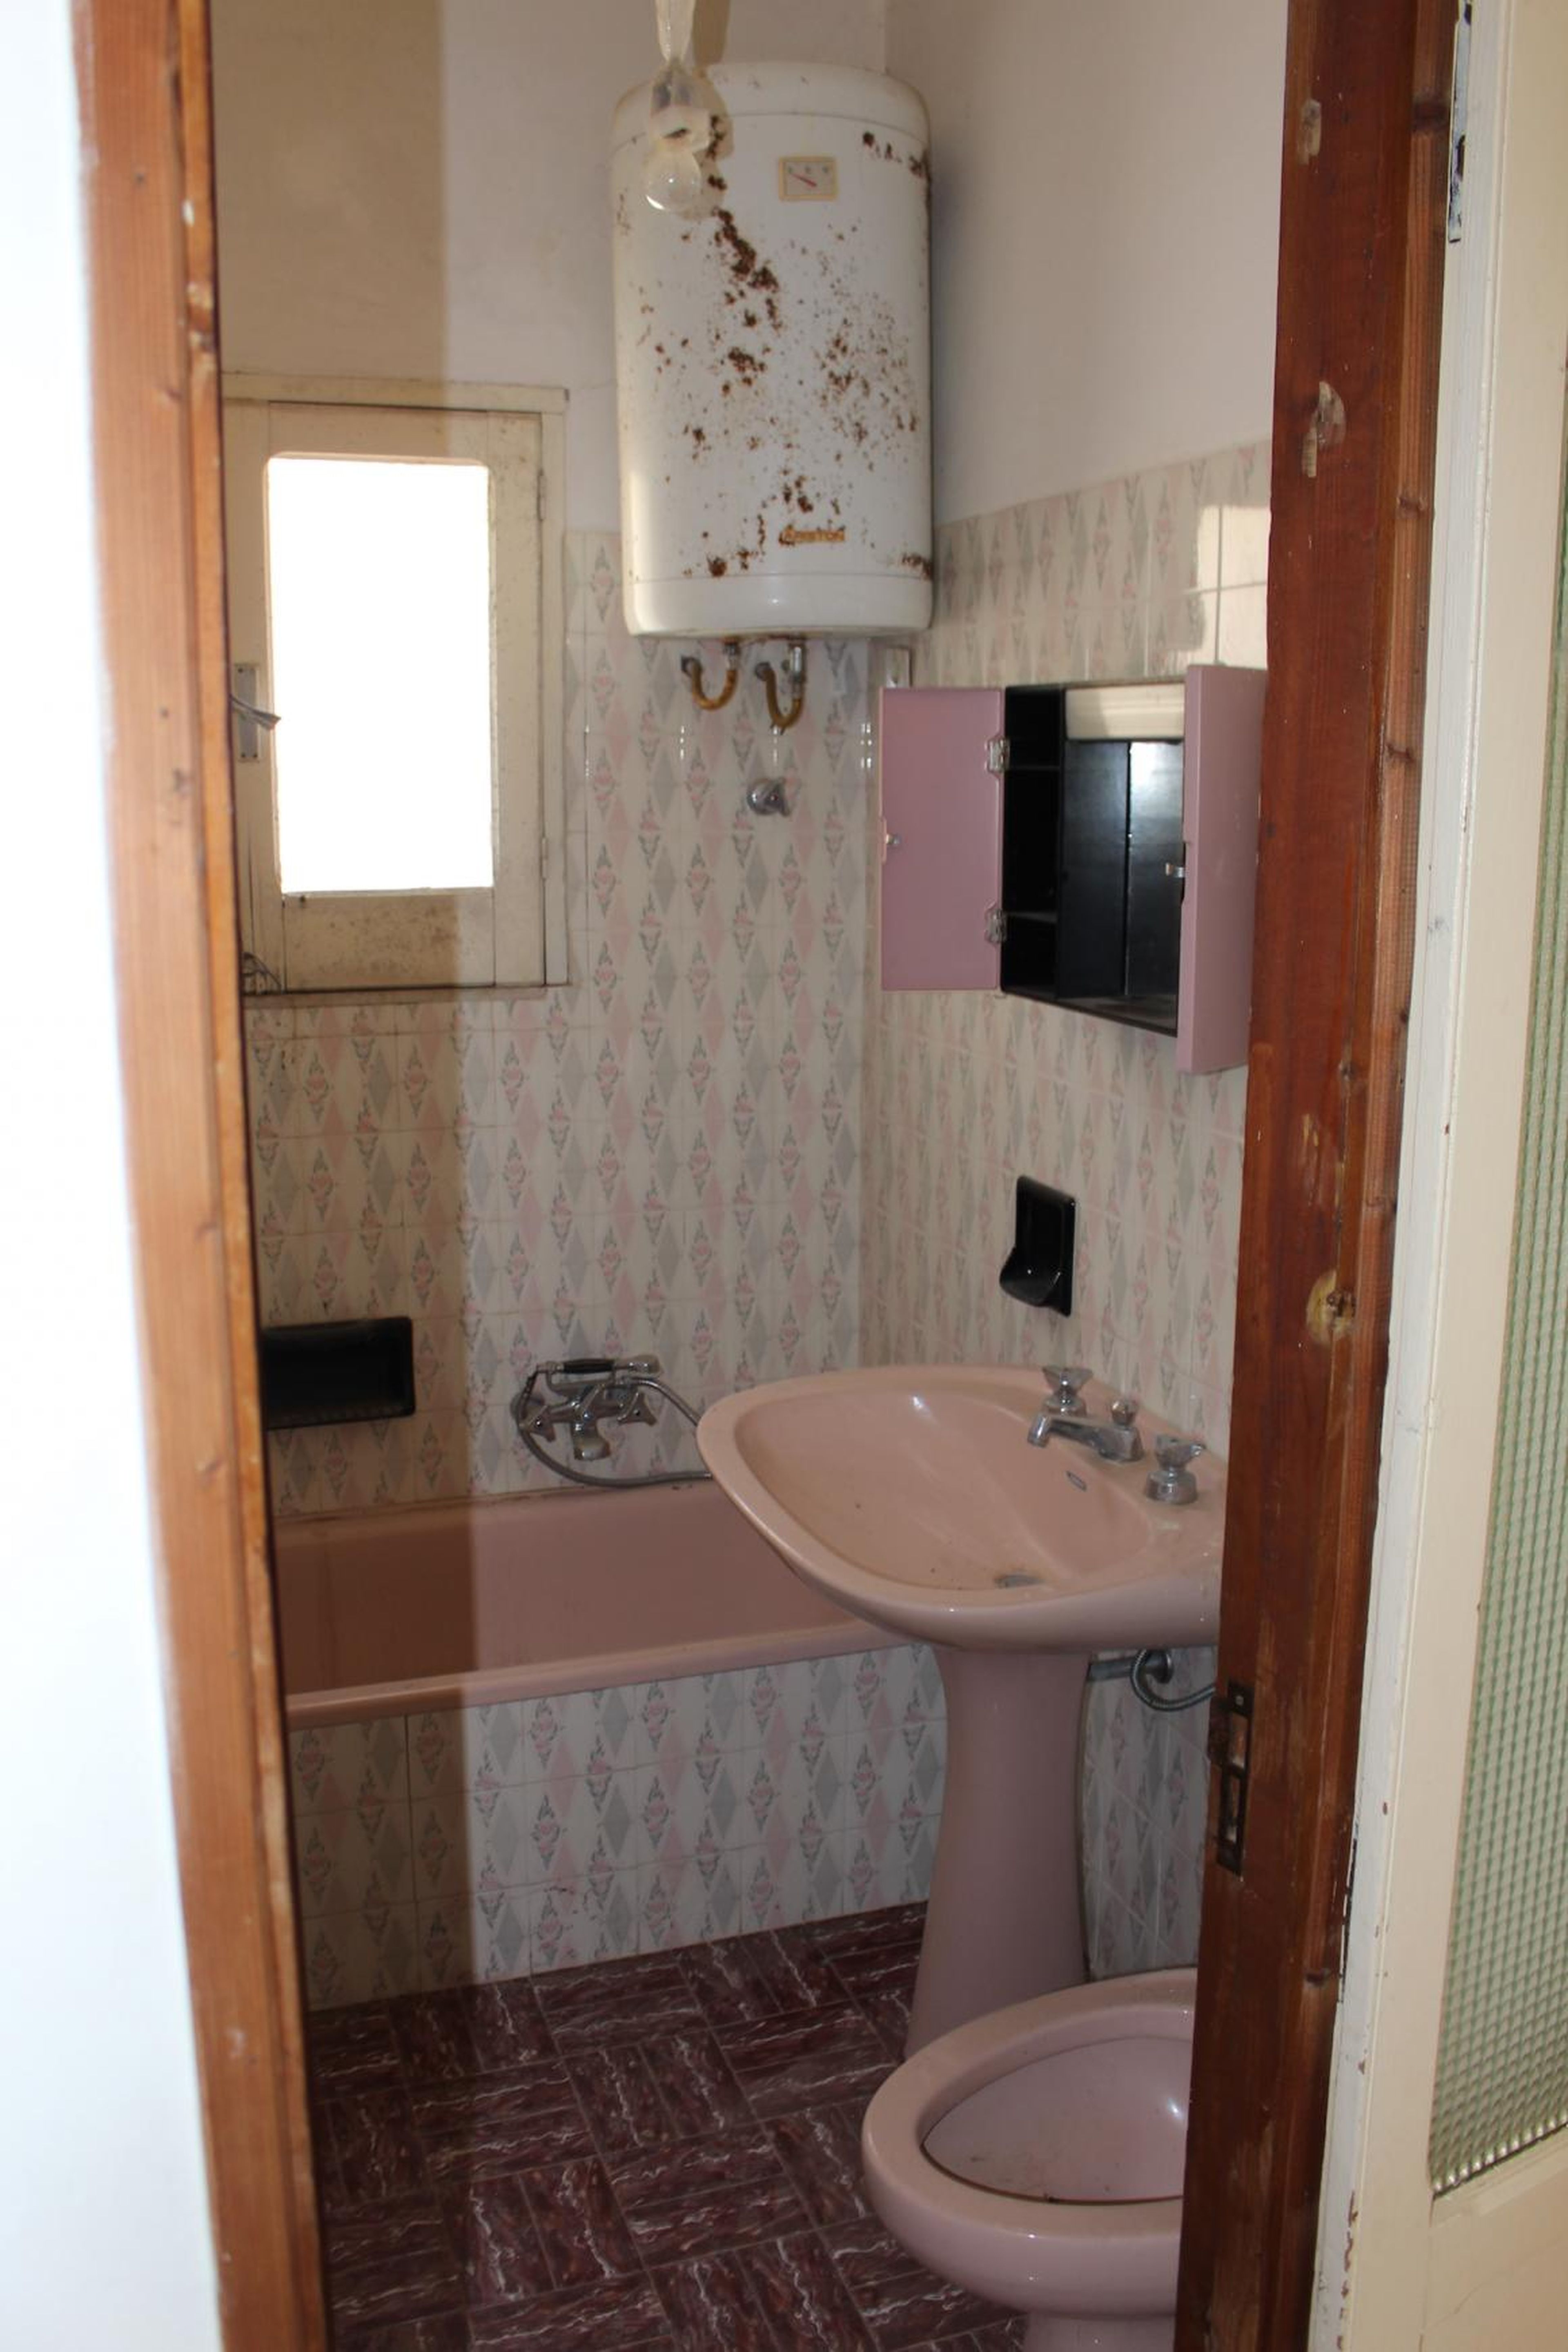 And a very pink bathroom.